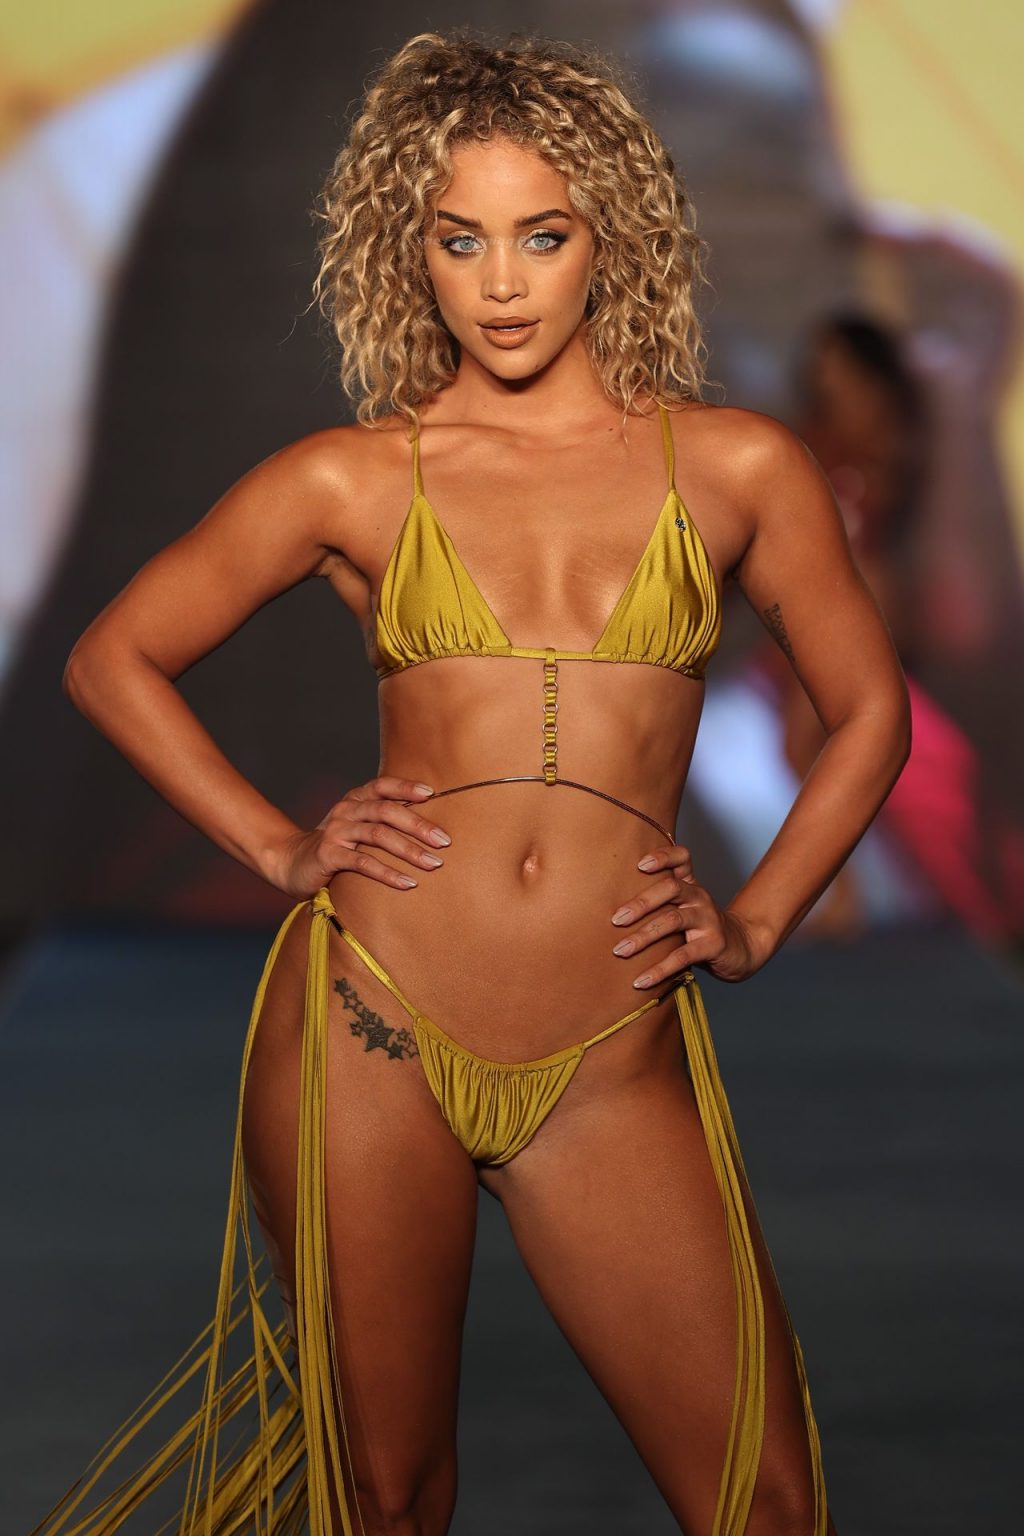 Tittyless Jasmine Sanders Wows at the 2021 Sports Illustrated Swimsuit Runway Show (105 Photos)